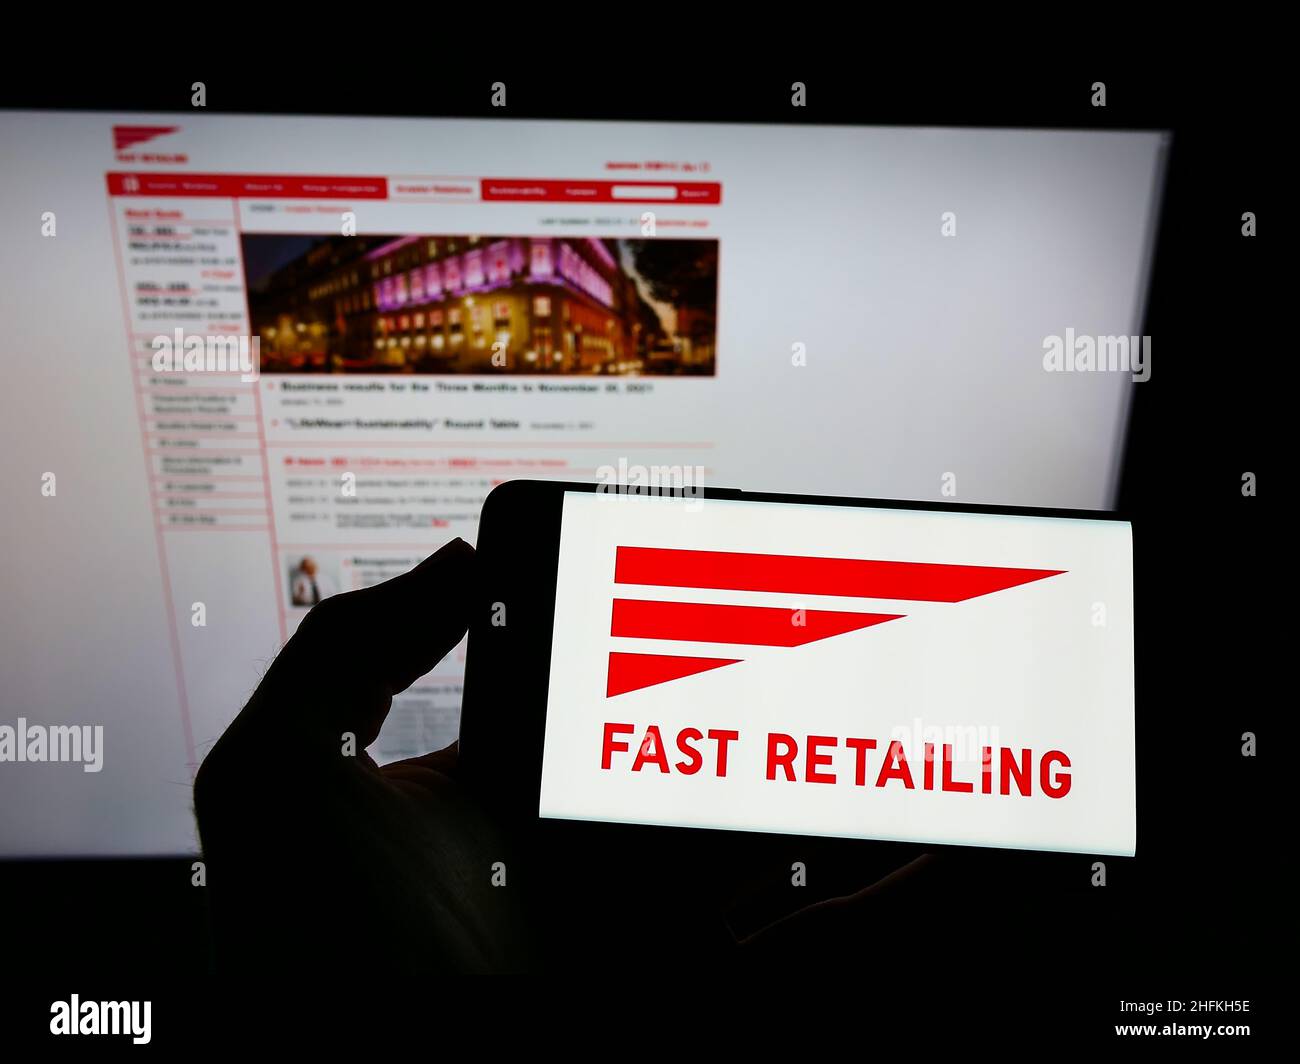 Person holding mobile phone with logo of Japanese retail company K.K. Fast Retailing on screen in front of web page. Focus on phone display. Stock Photo